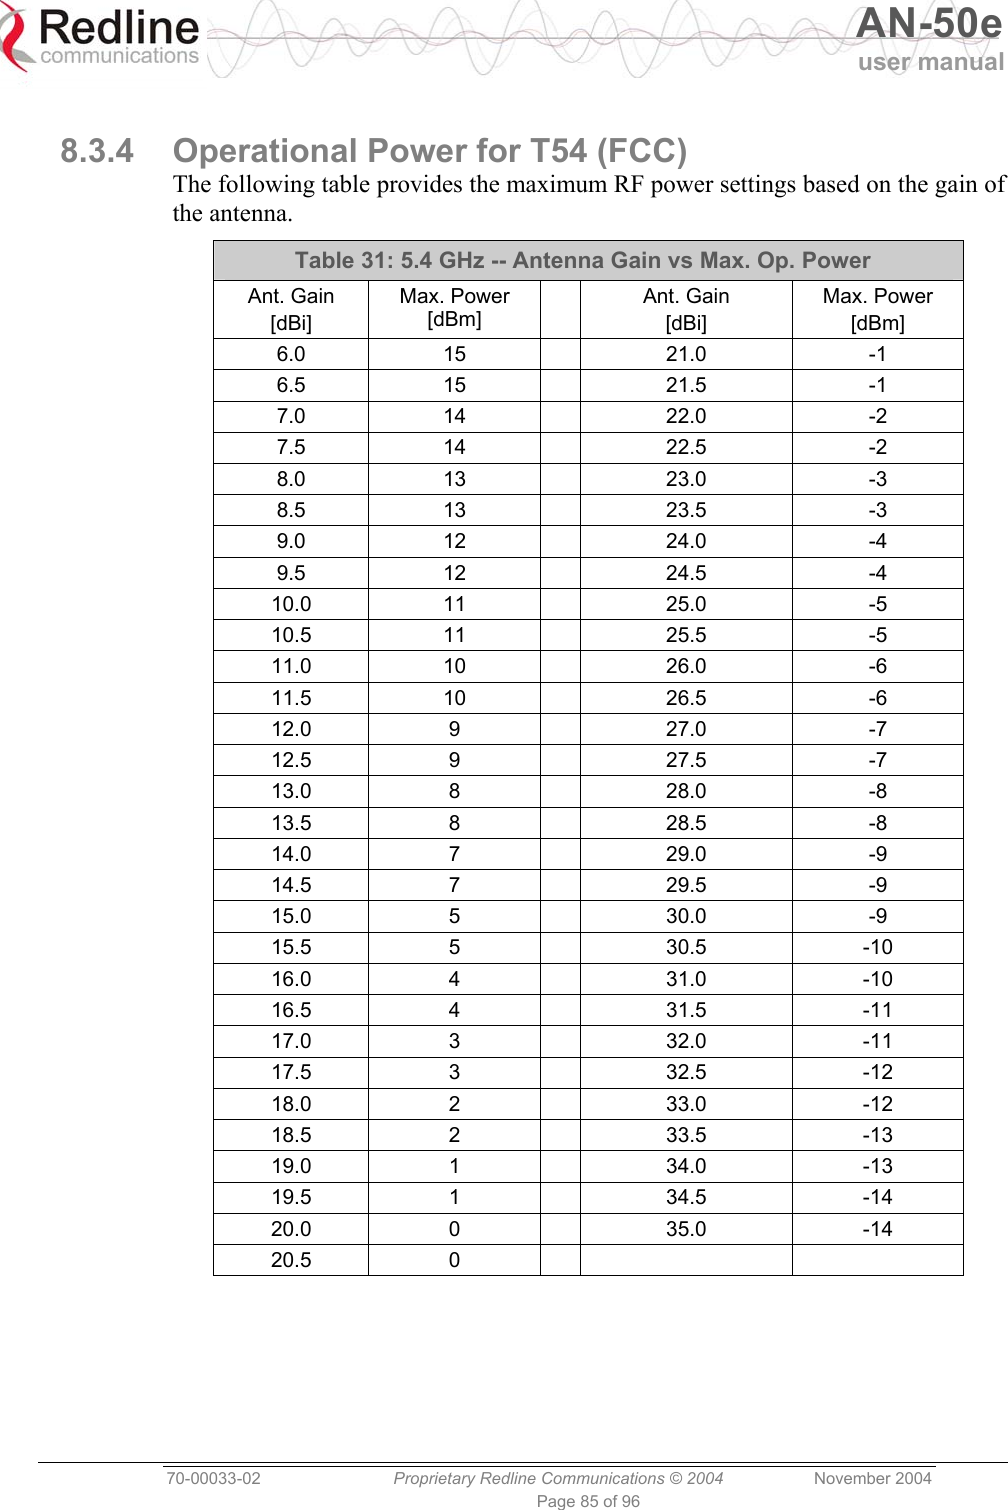   AN-50e user manual  70-00033-02  Proprietary Redline Communications © 2004 November 2004 Page 85 of 96  8.3.4  Operational Power for T54 (FCC) The following table provides the maximum RF power settings based on the gain of the antenna. Table 31: 5.4 GHz -- Antenna Gain vs Max. Op. Power Ant. Gain [dBi] Max. Power [dBm]  Ant. Gain [dBi] Max. Power [dBm] 6.0 15  21.0  -1 6.5 15  21.5  -1 7.0 14  22.0  -2 7.5 14  22.5  -2 8.0 13  23.0  -3 8.5 13  23.5  -3 9.0 12  24.0  -4 9.5 12  24.5  -4 10.0 11  25.0  -5 10.5 11  25.5  -5 11.0 10  26.0  -6 11.5 10  26.5  -6 12.0 9  27.0  -7 12.5 9  27.5  -7 13.0 8  28.0  -8 13.5 8  28.5  -8 14.0 7  29.0  -9 14.5 7  29.5  -9 15.0 5  30.0  -9 15.5 5  30.5  -10 16.0 4  31.0  -10 16.5 4  31.5  -11 17.0 3  32.0  -11 17.5 3  32.5  -12 18.0 2  33.0  -12 18.5 2  33.5  -13 19.0 1  34.0  -13 19.5 1  34.5  -14 20.0 0  35.0  -14 20.5 0      